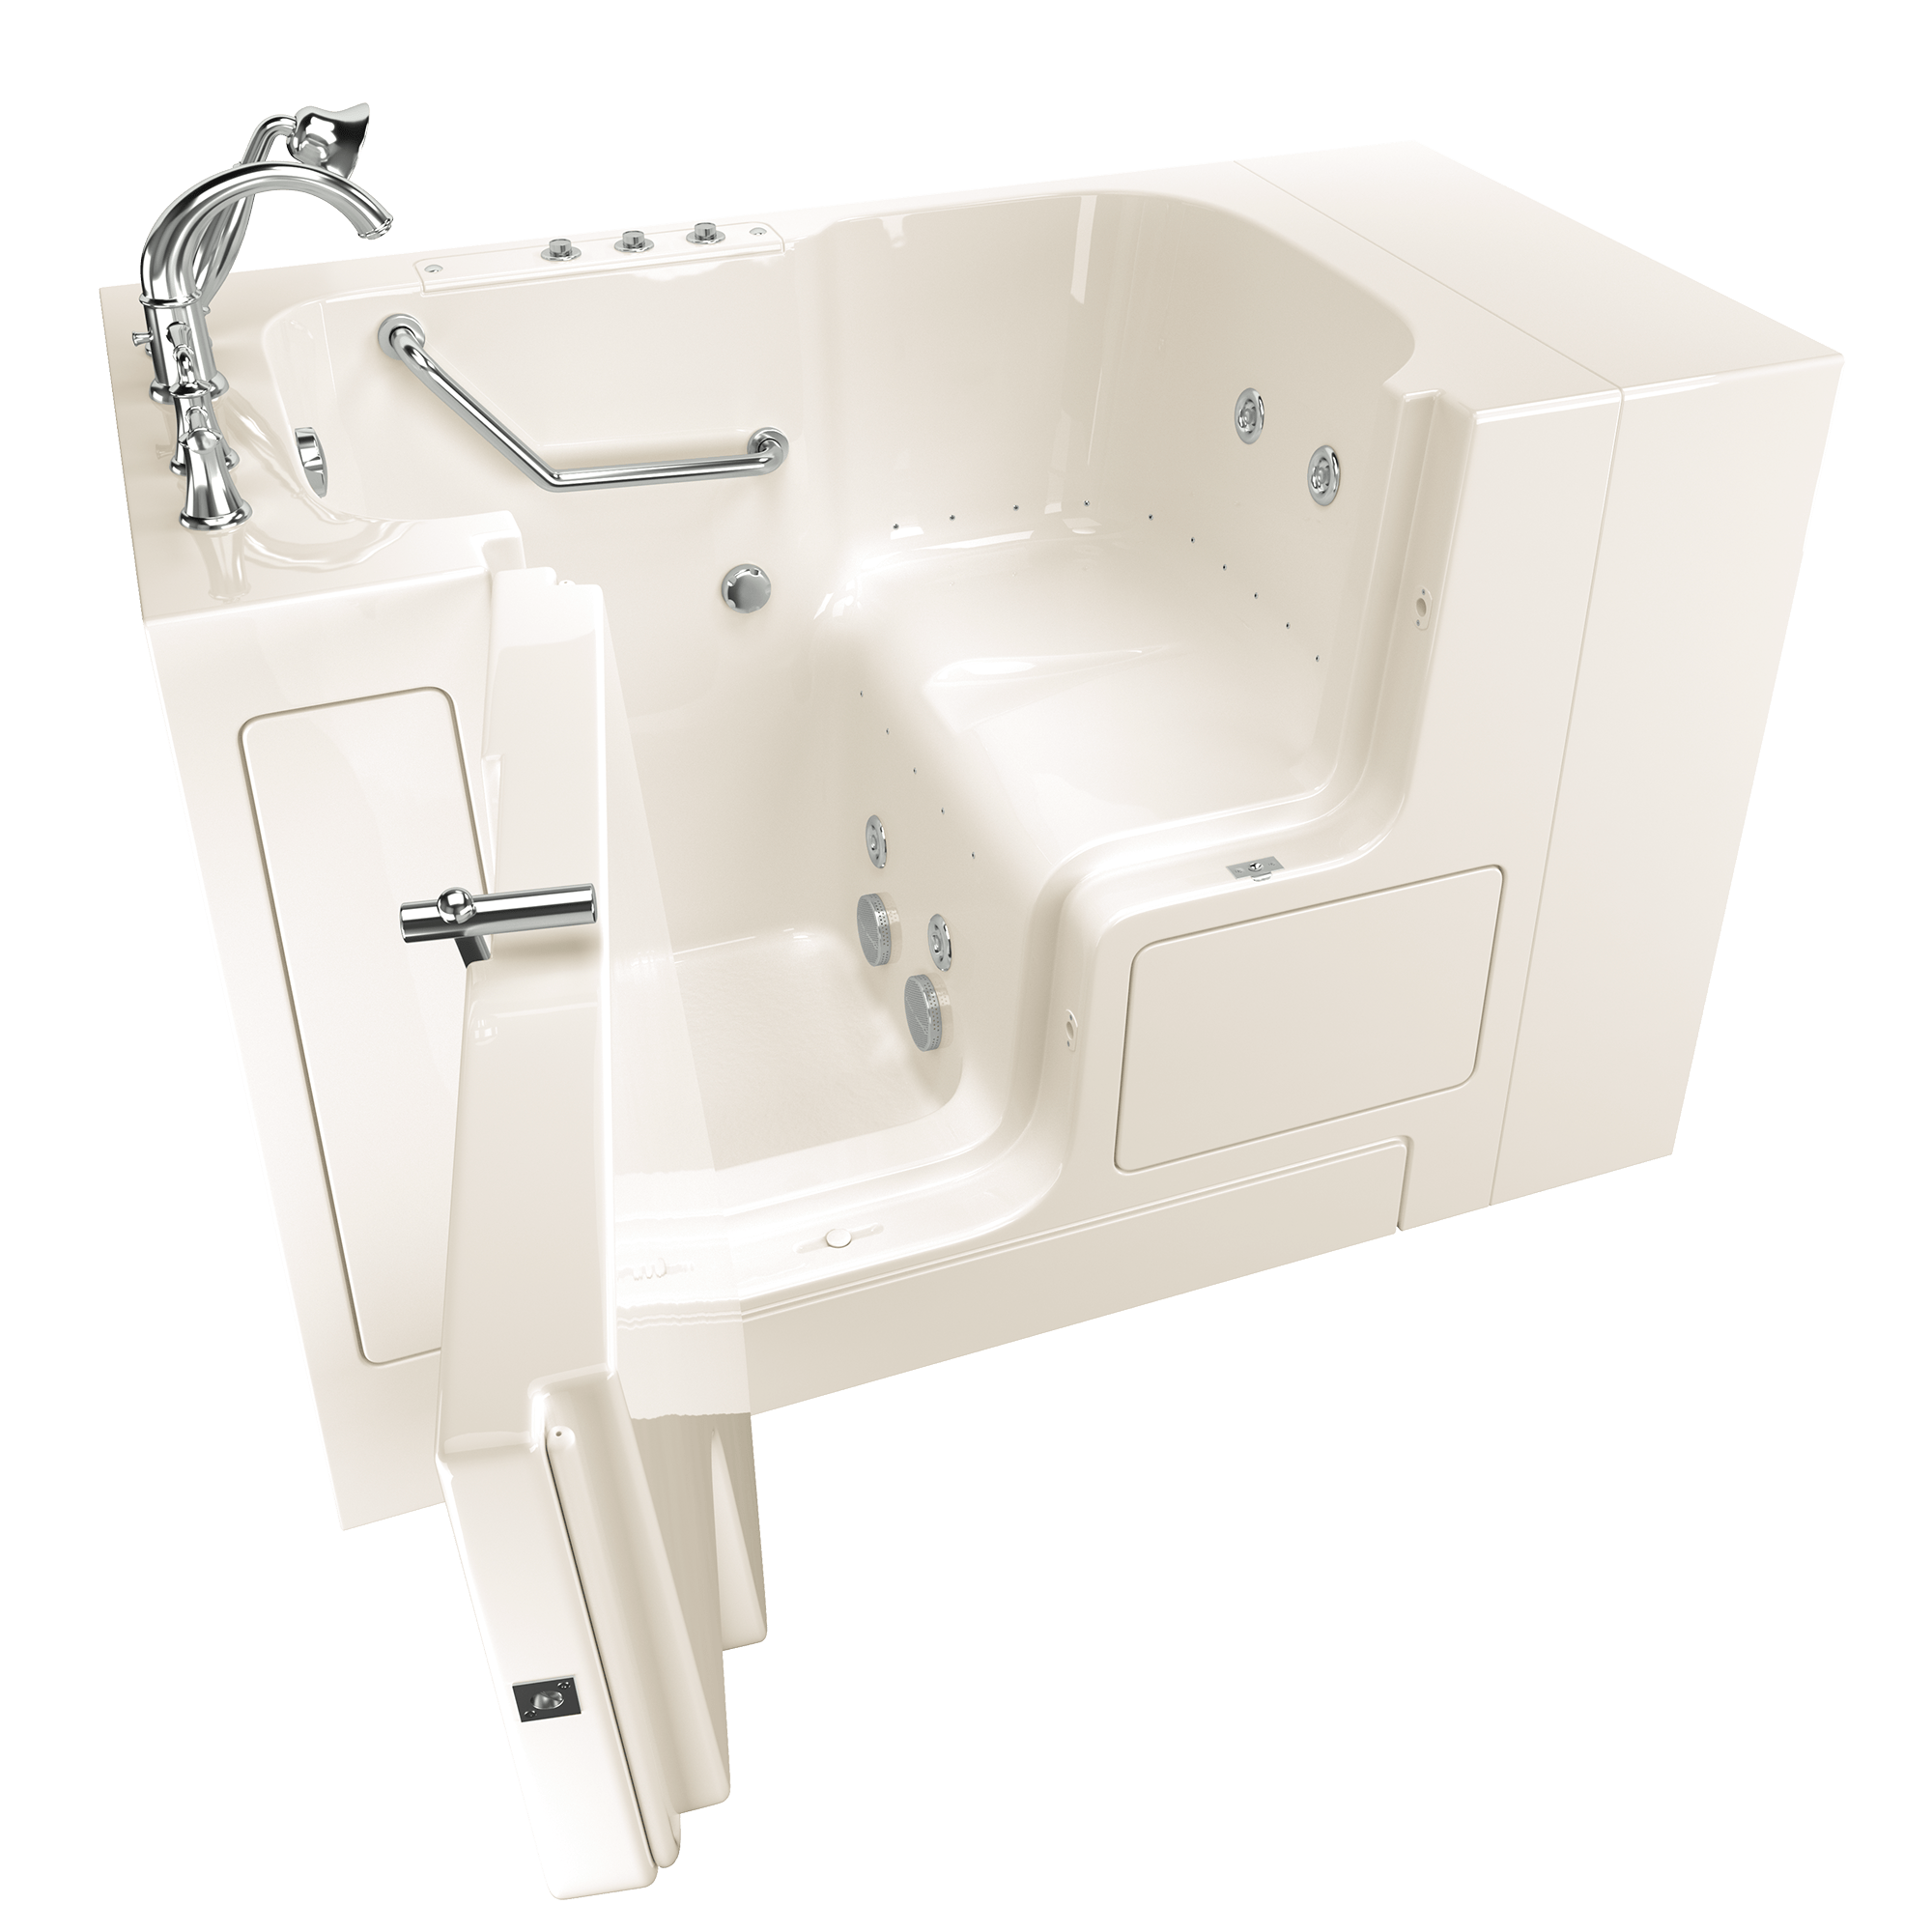 Gelcoat Value Series 32 x 52  Inch Walk in Tub With Combination Air Spa and Whirlpool Systems   Left Hand Drain With Faucet WIB LINEN